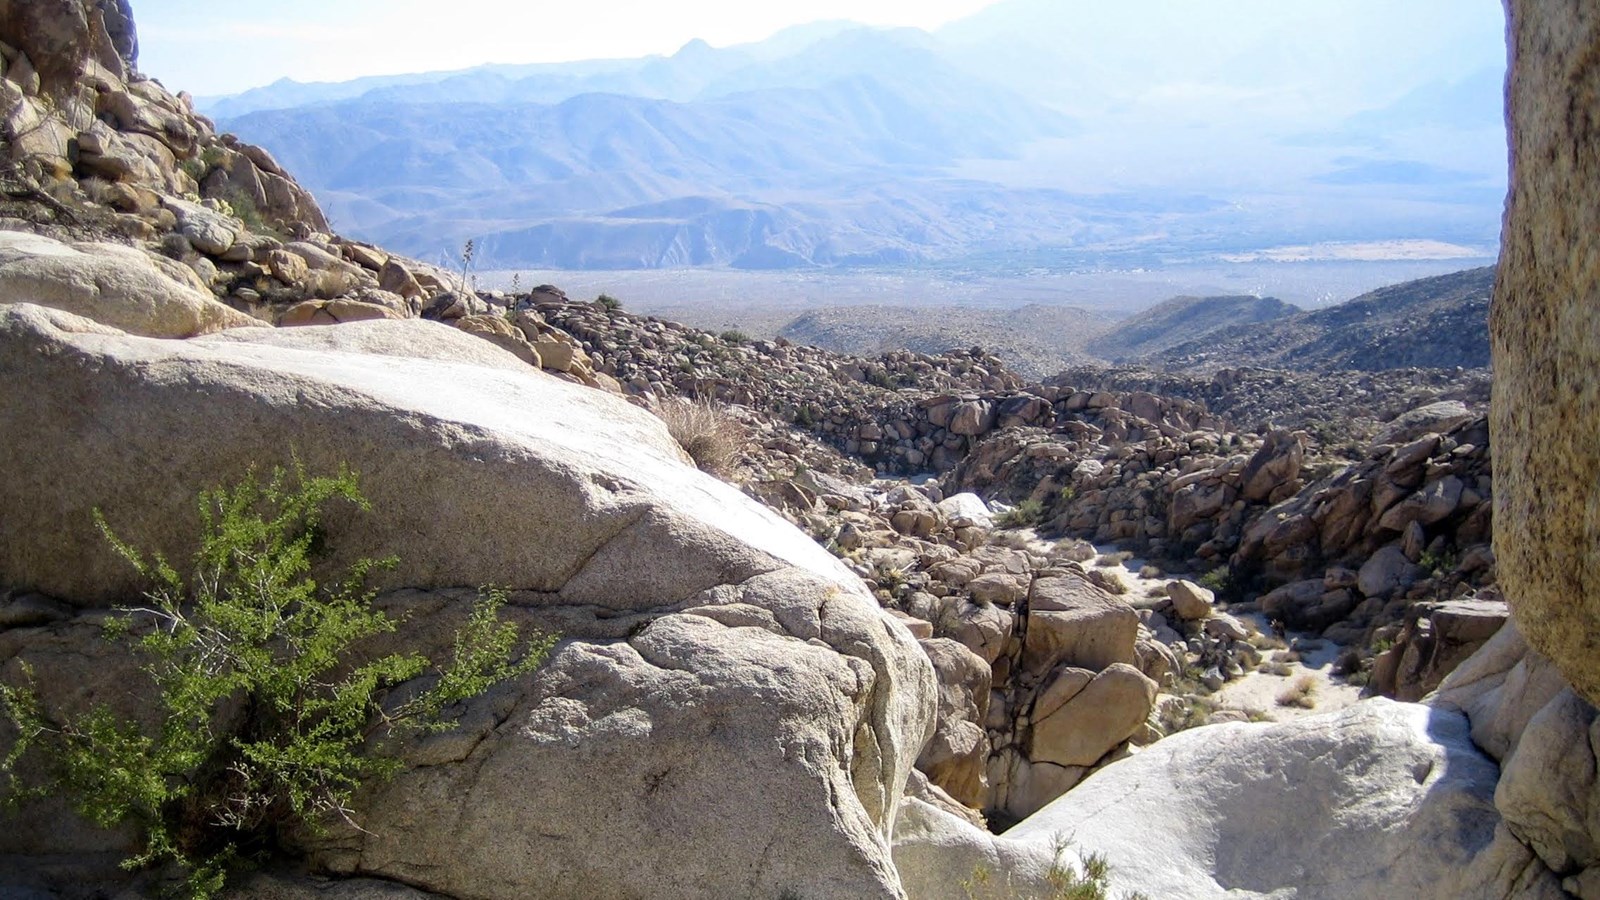 A view of a desert valley framed by exposed rock and boulders